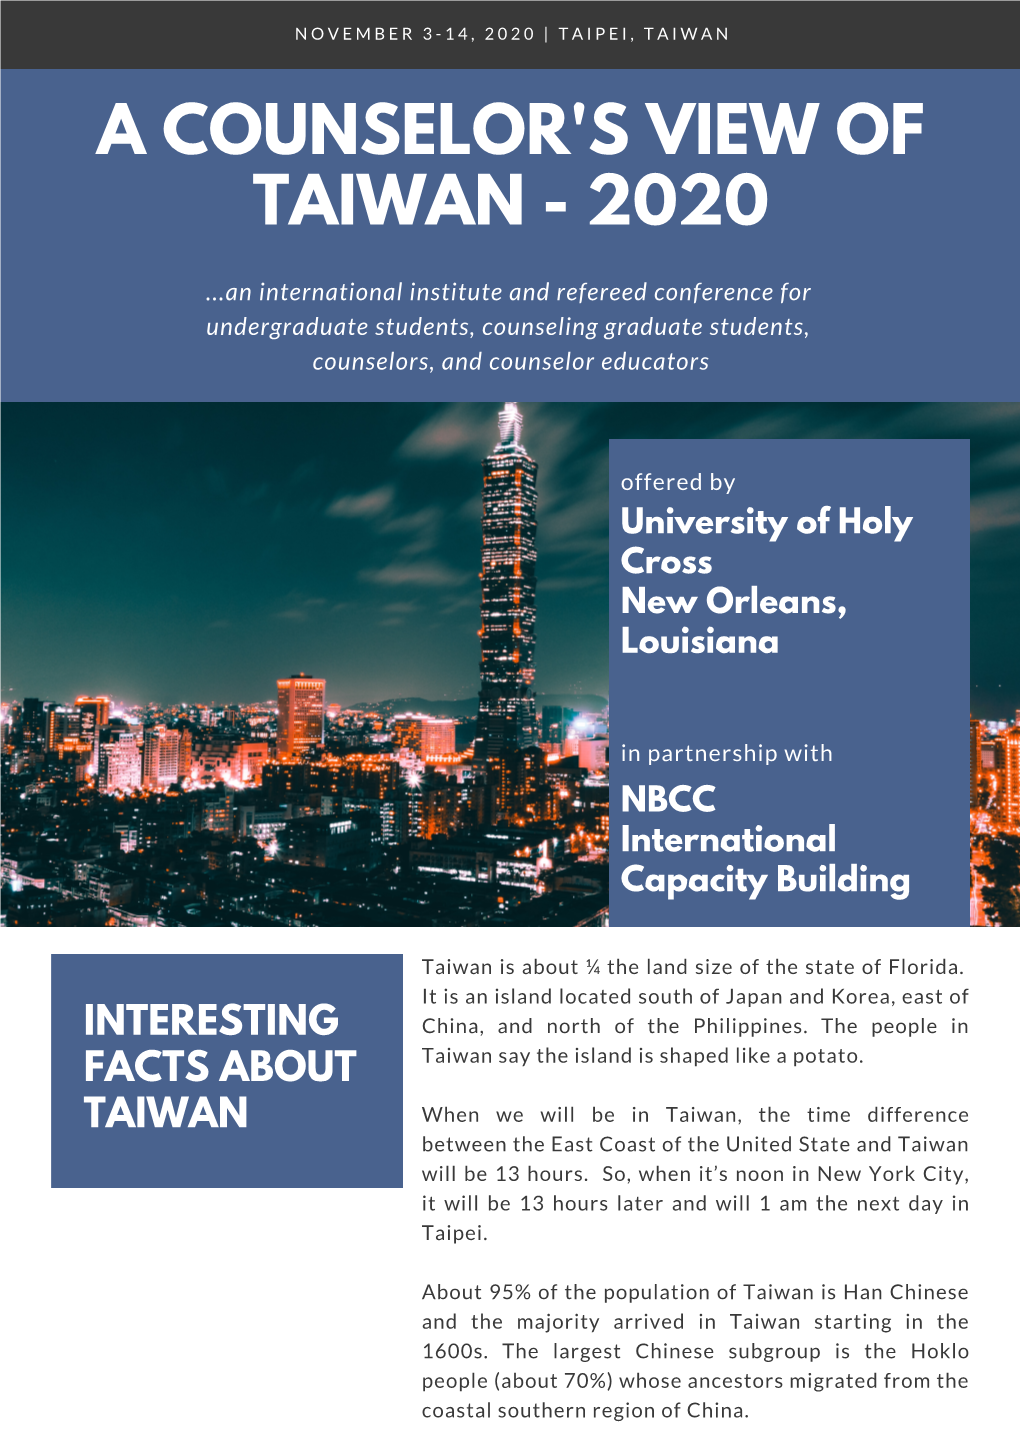 A Counselor's View of Taiwan - 2020